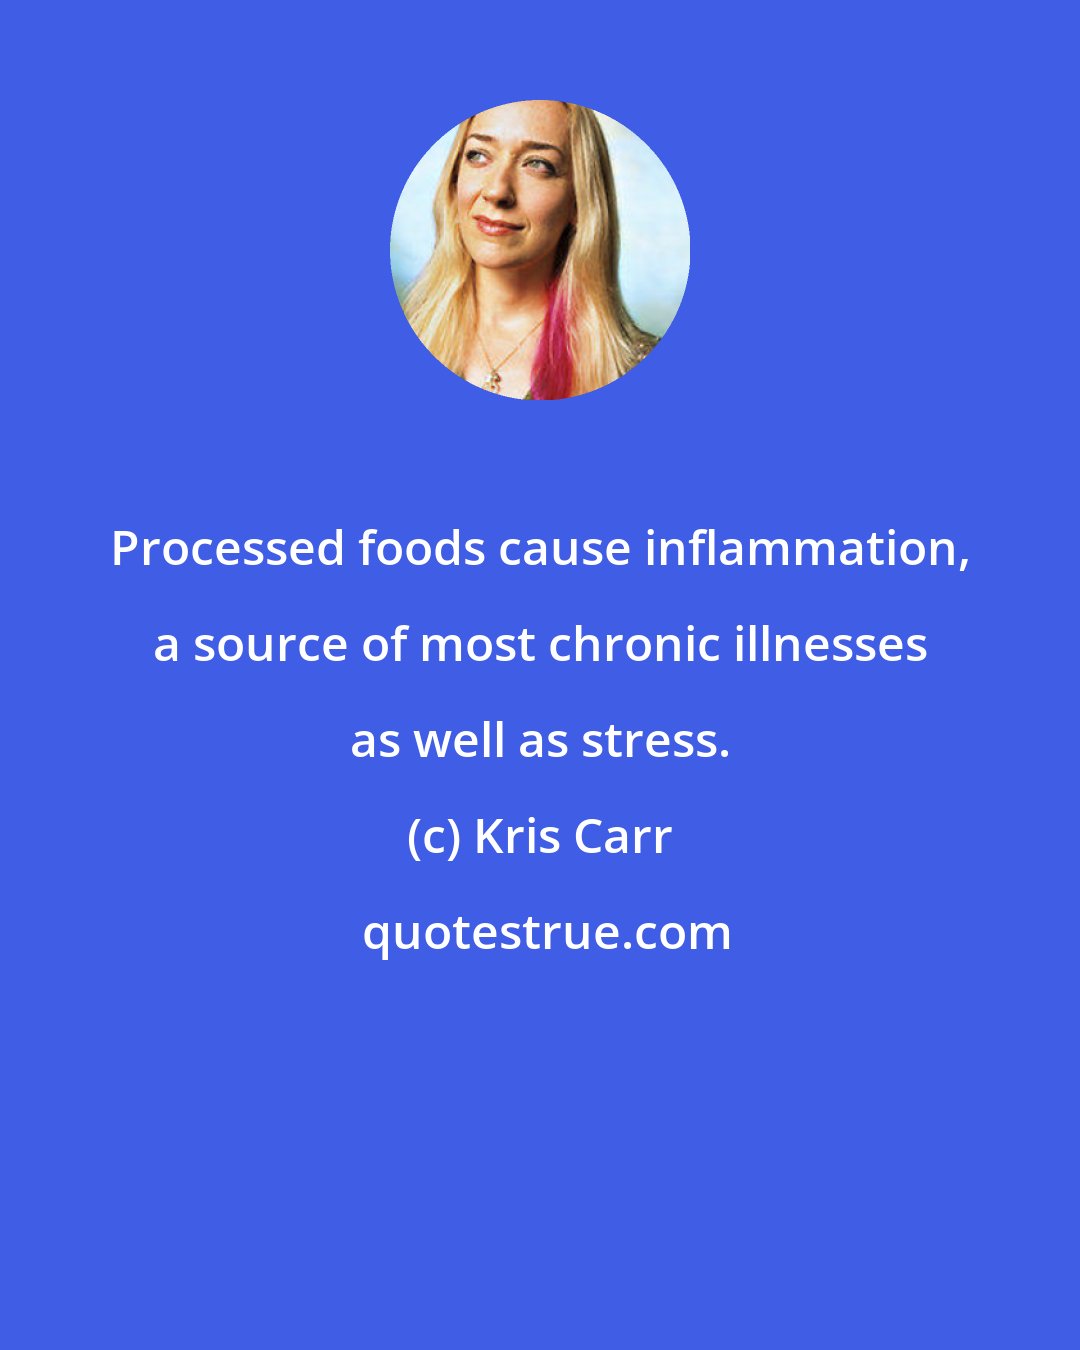 Kris Carr: Processed foods cause inflammation, a source of most chronic illnesses as well as stress.